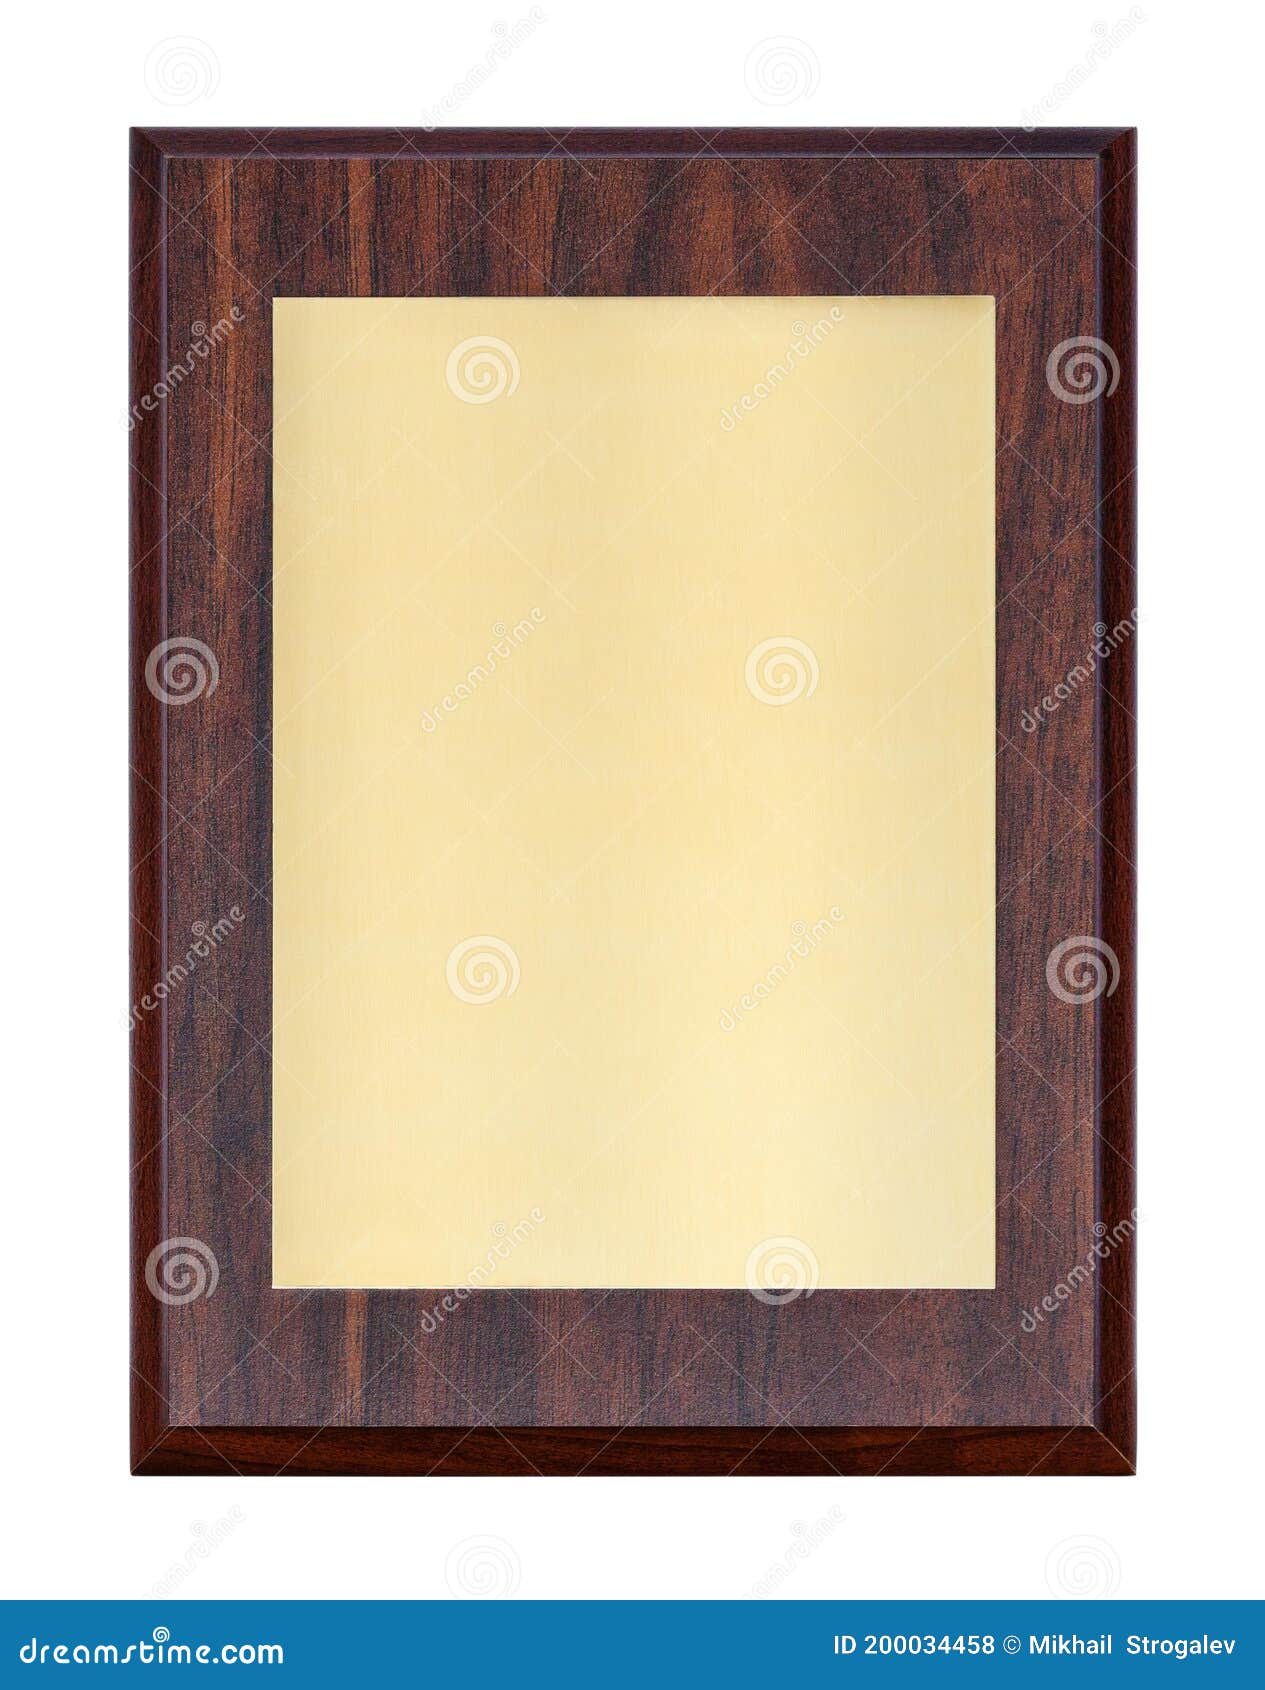 golden plaque or name board in wooden frame,  on a white background